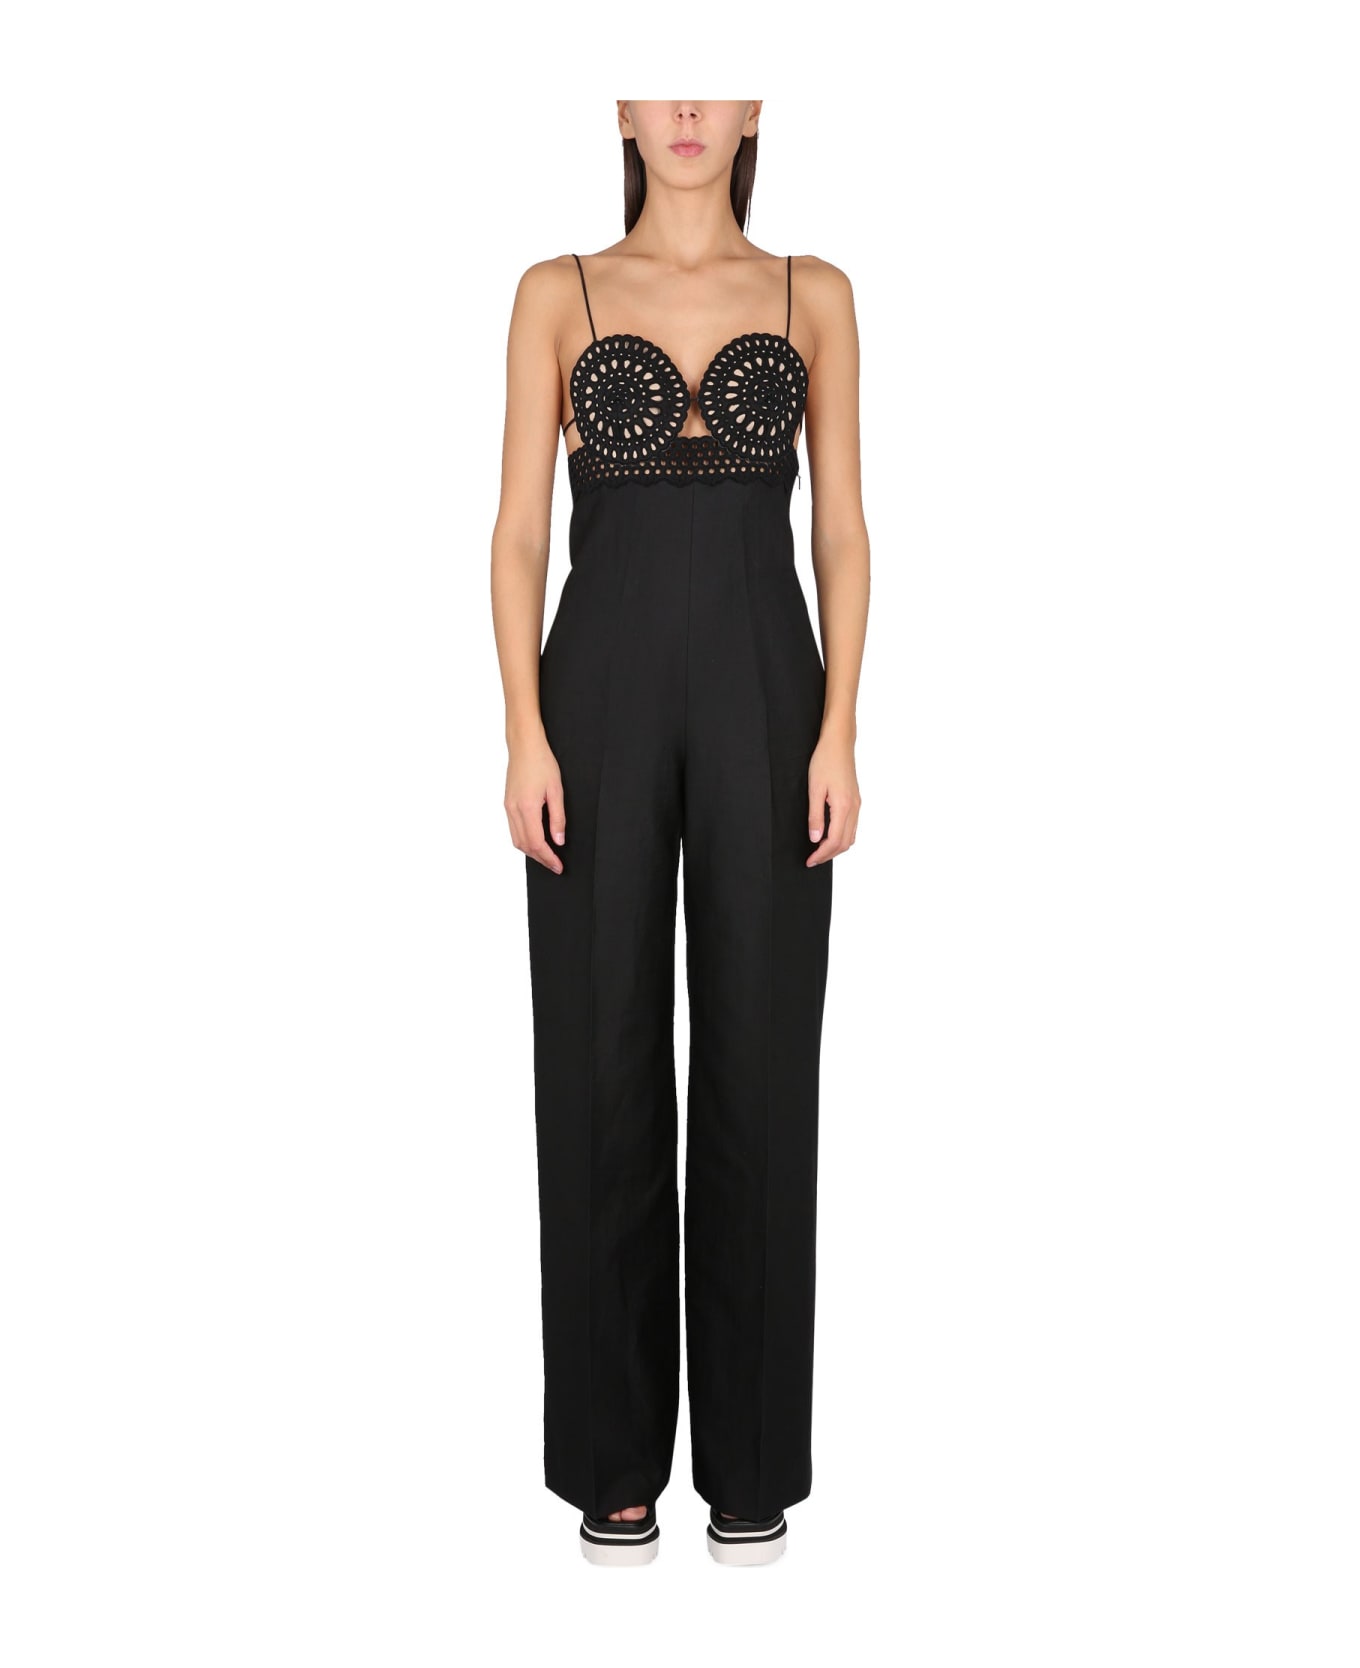 Stella McCartney Broderie Anglaise Bustier Jumpsuit - Black ジャンプスーツ